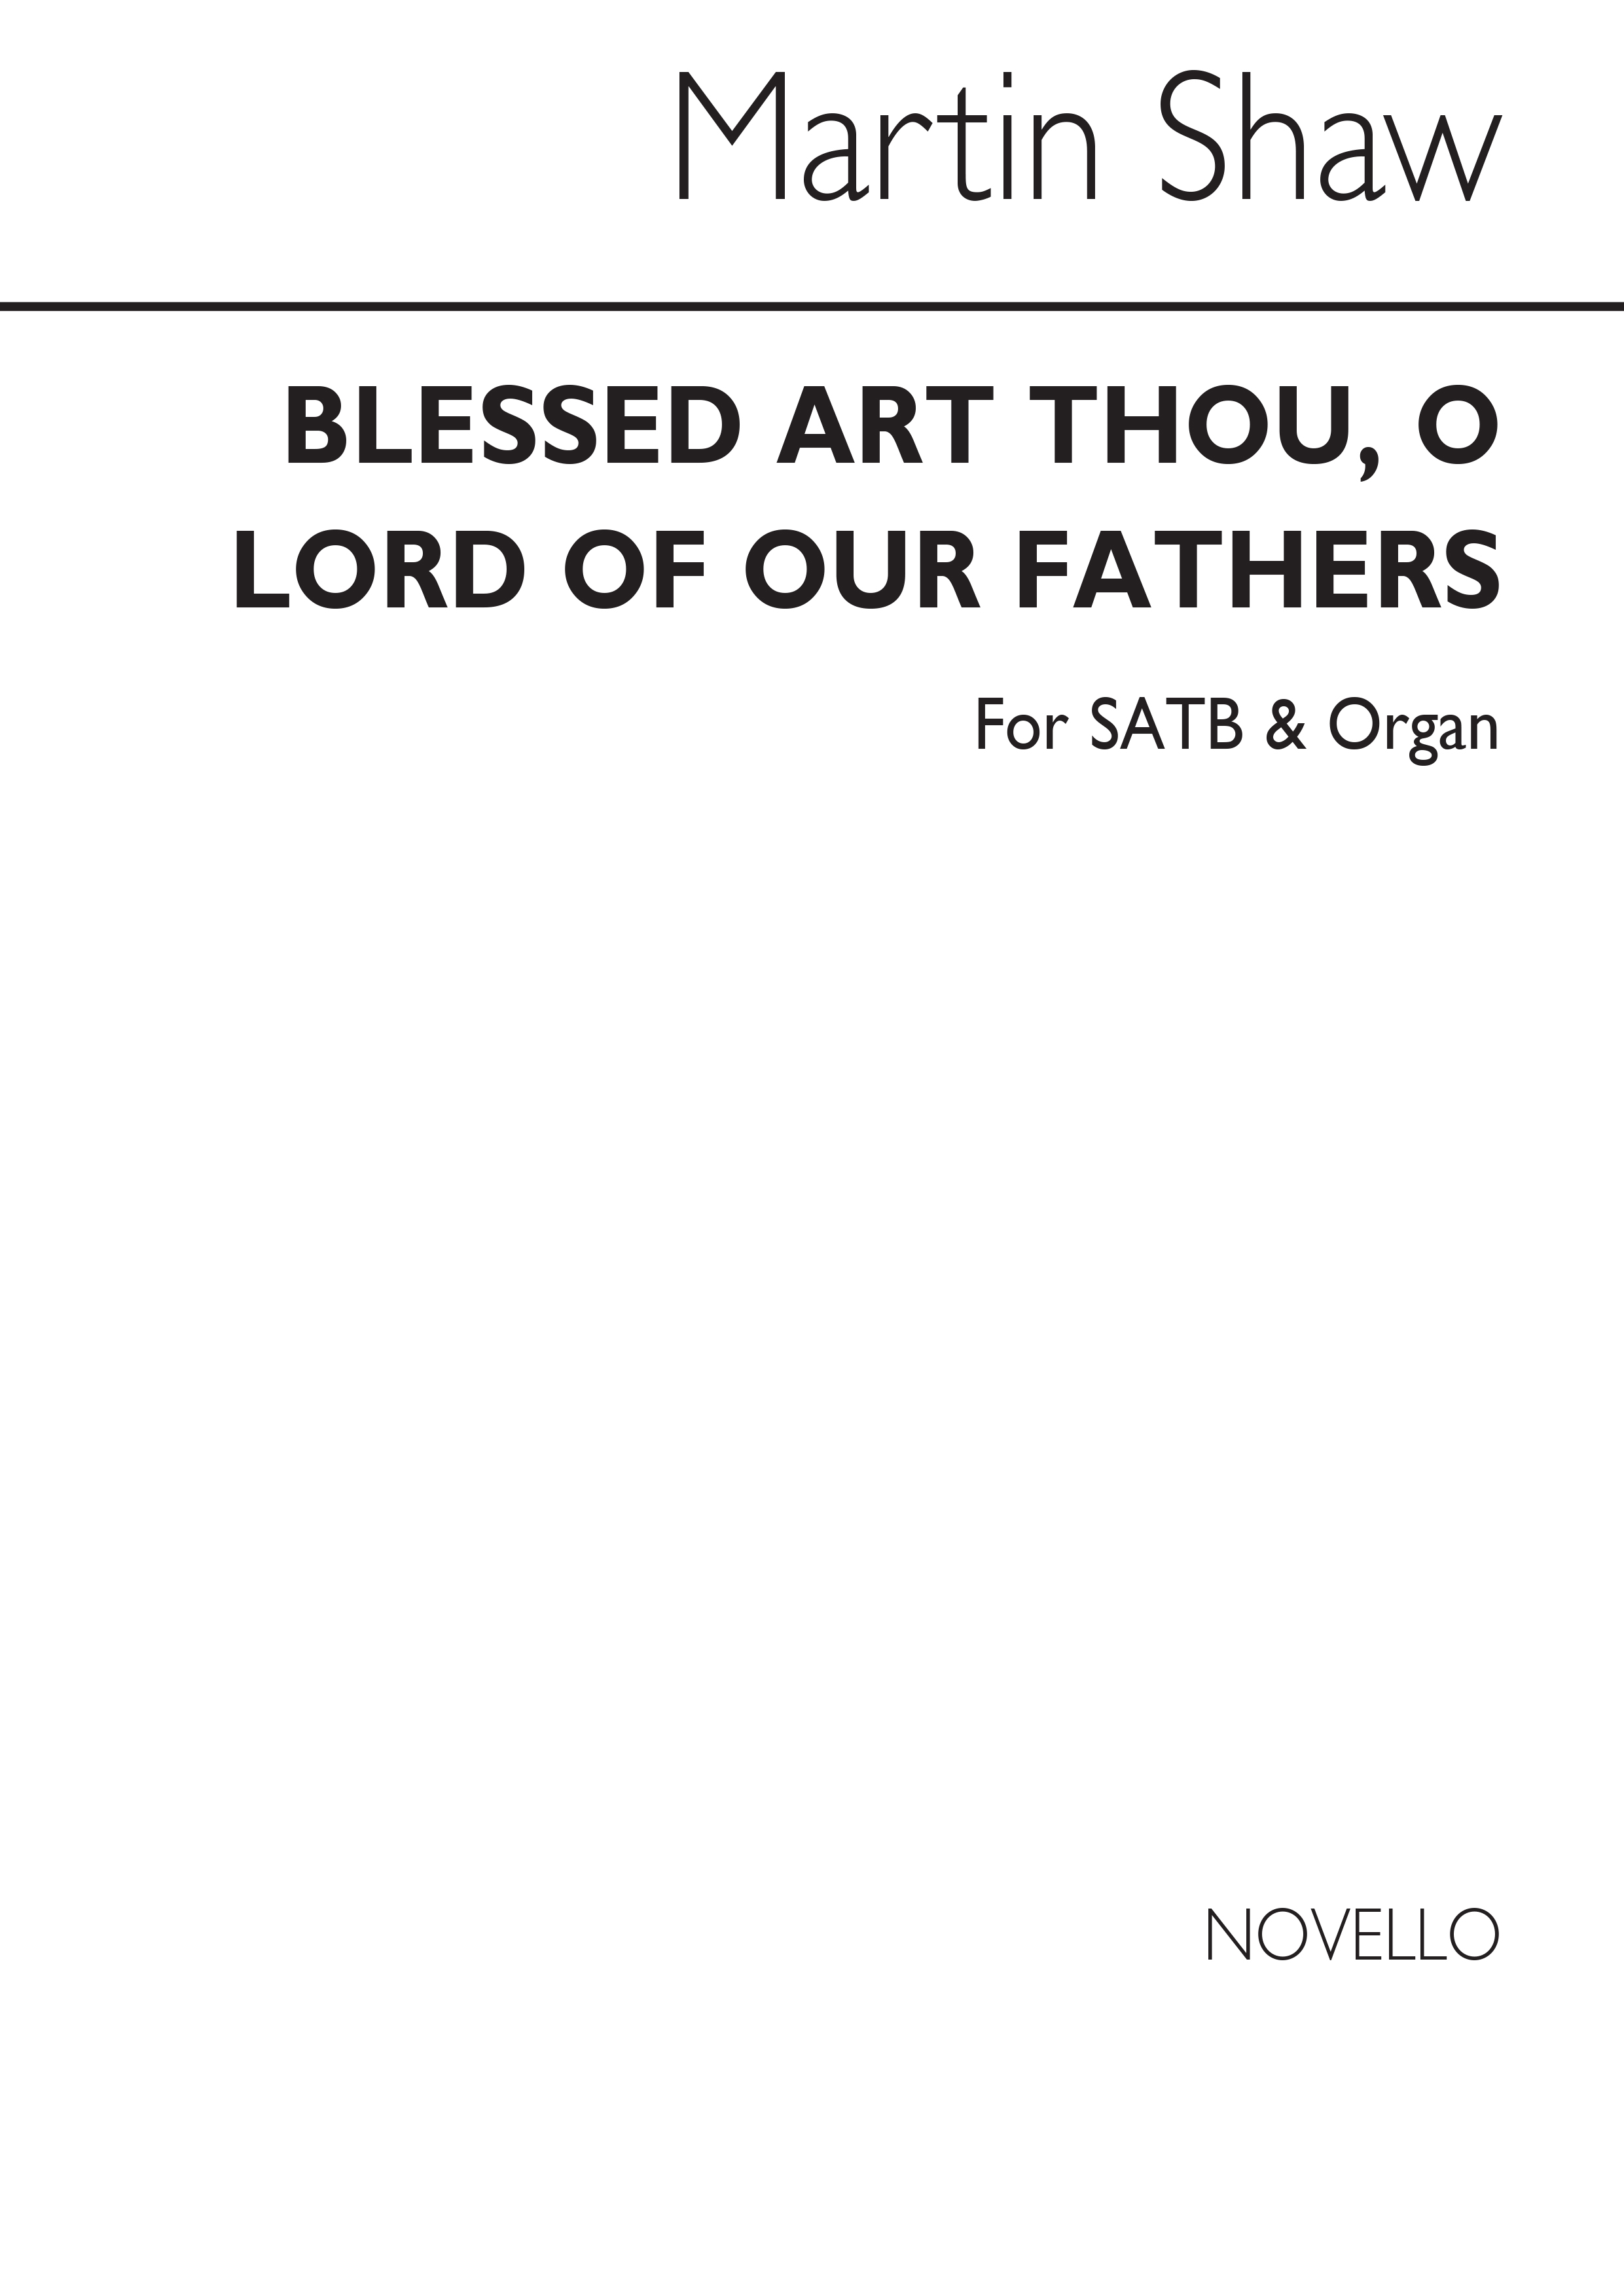 Martin Shaw: Blessed Art Thou, O Lord for SATB Chorus